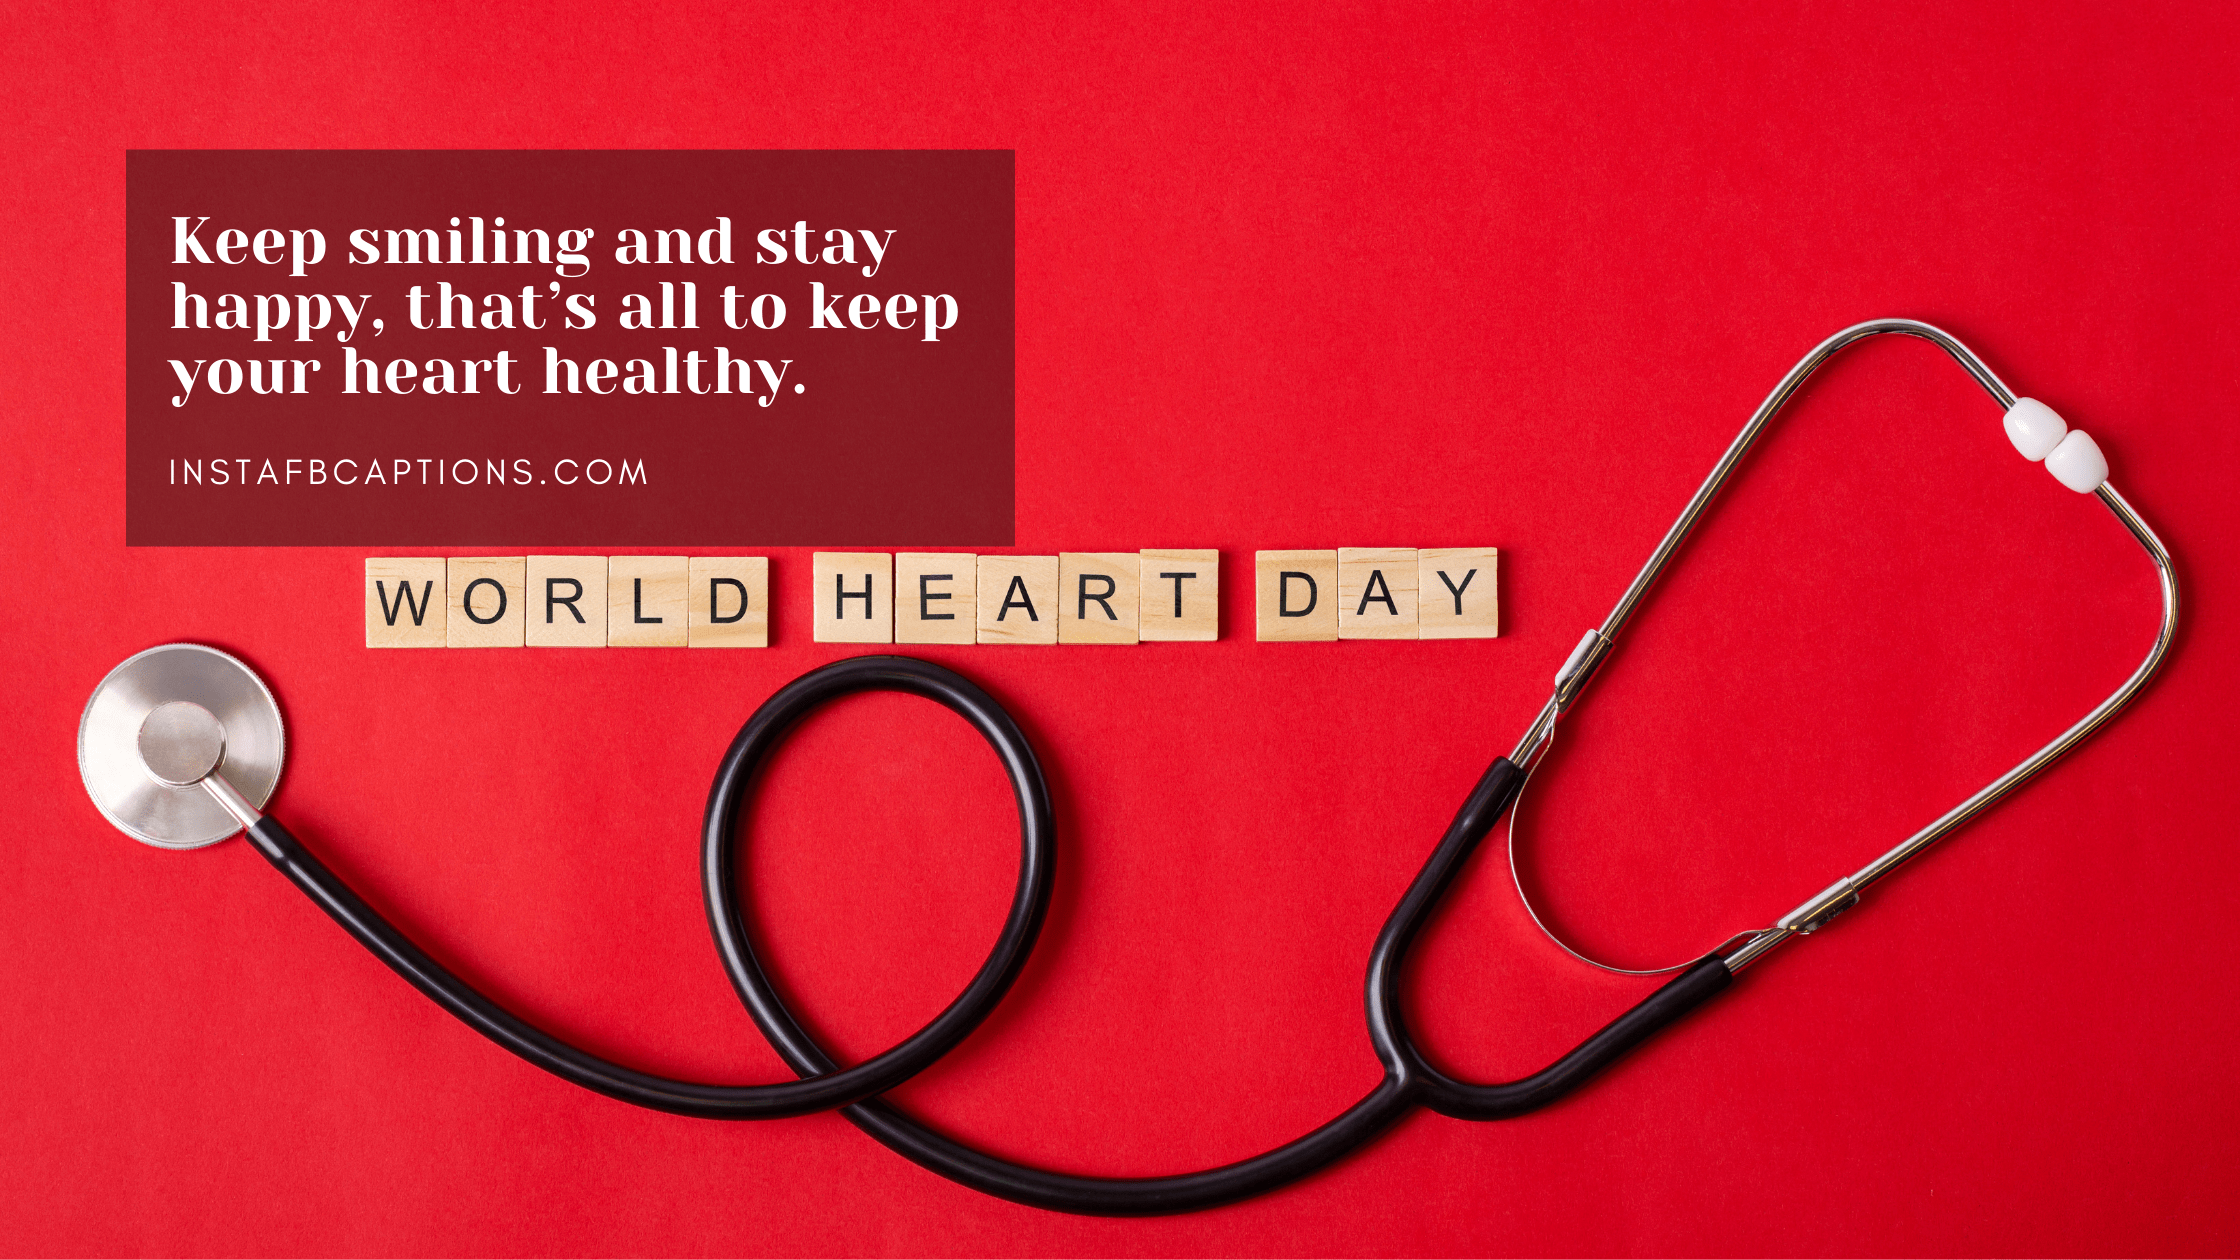 Some Of The Best World Heart Day Wishes  - Some of the Best World Heart Day Wishes  - 99 World Heart Day Captions, Quotes, Wishes in 2023